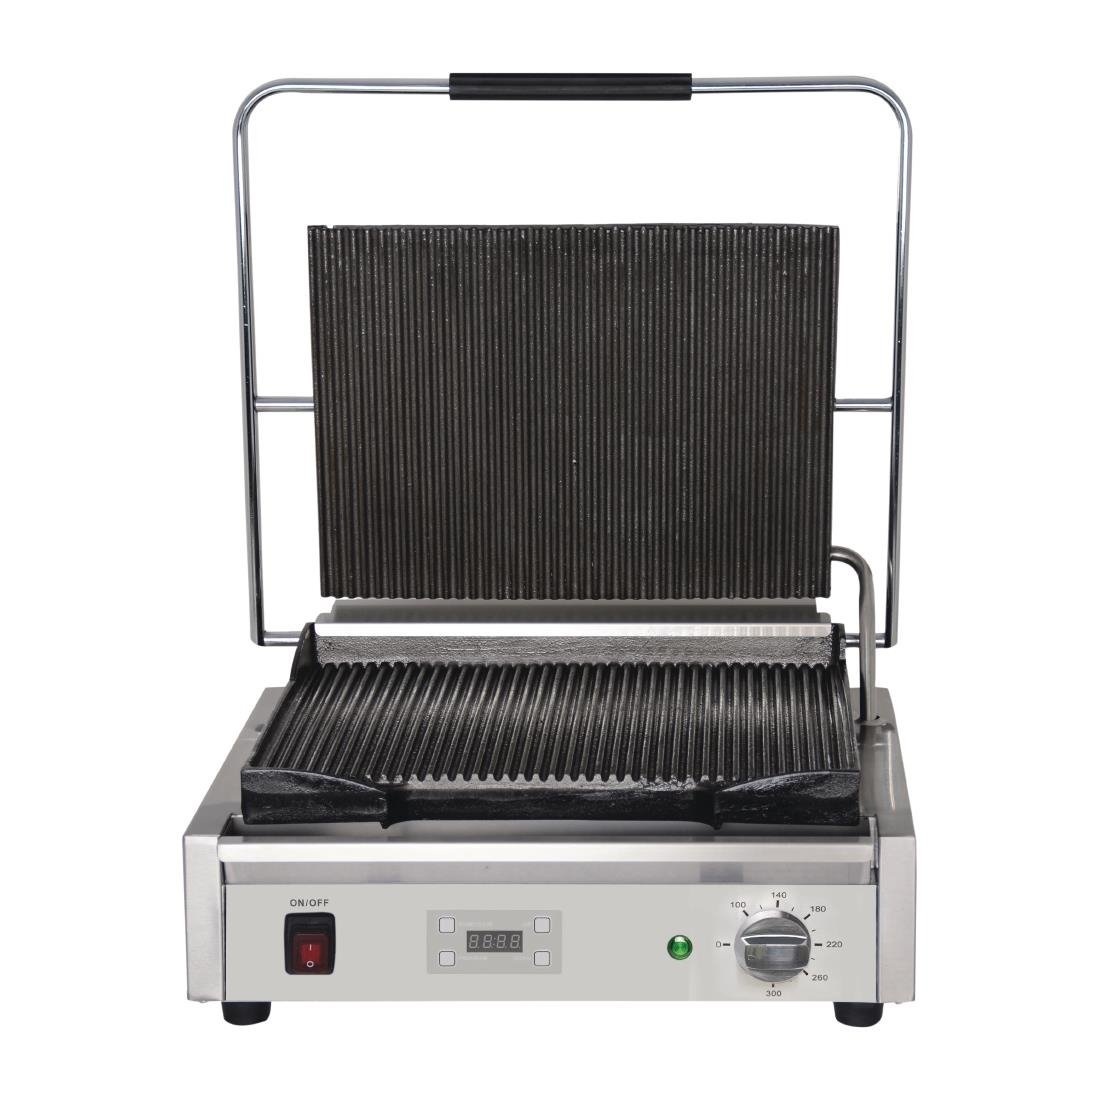 Buffalo Contactgrill Groot | Groef/Groef | 2200W | 480x435x(H)215mm